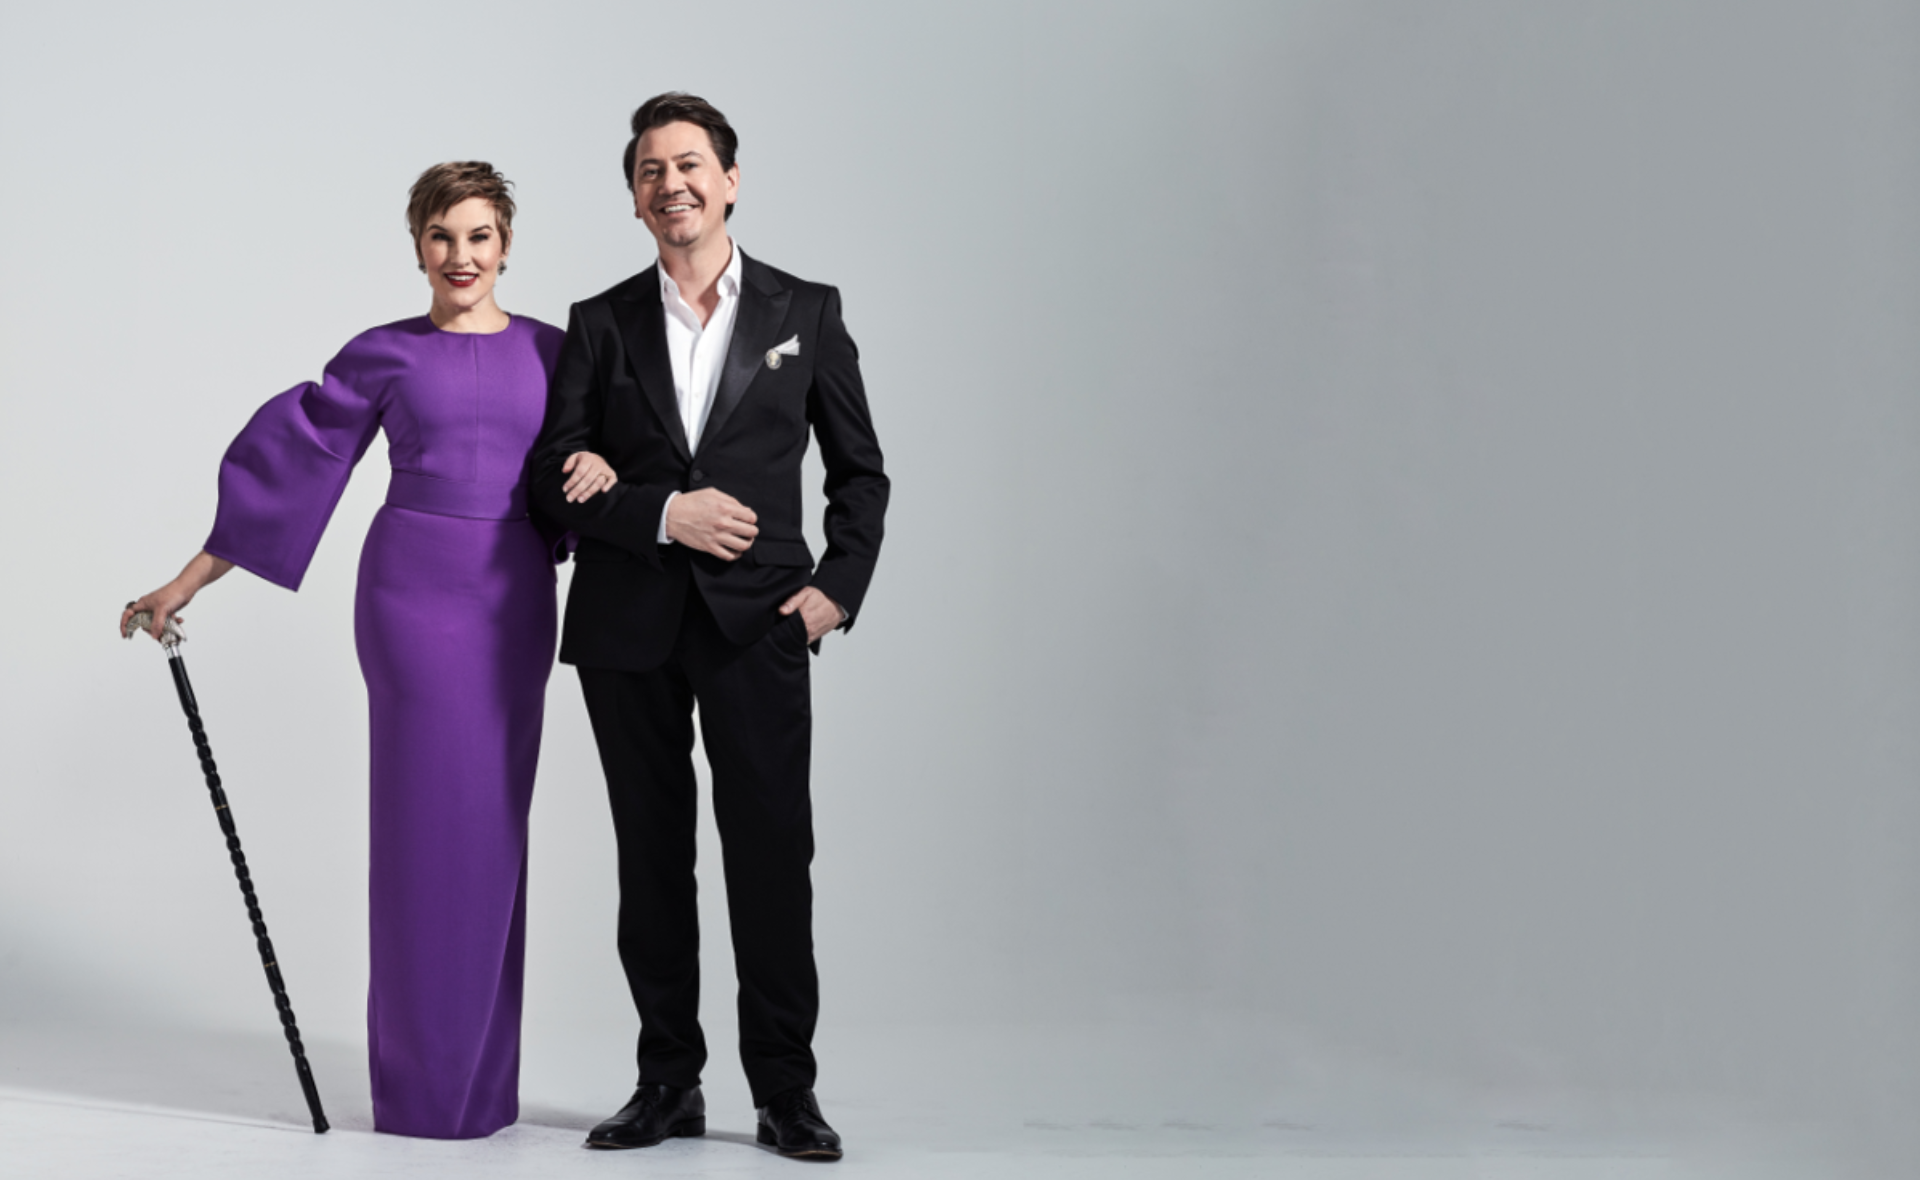 Real-life couple Kate Mulvany and Hamish Michael on what made courtroom drama The Twelve so appealing